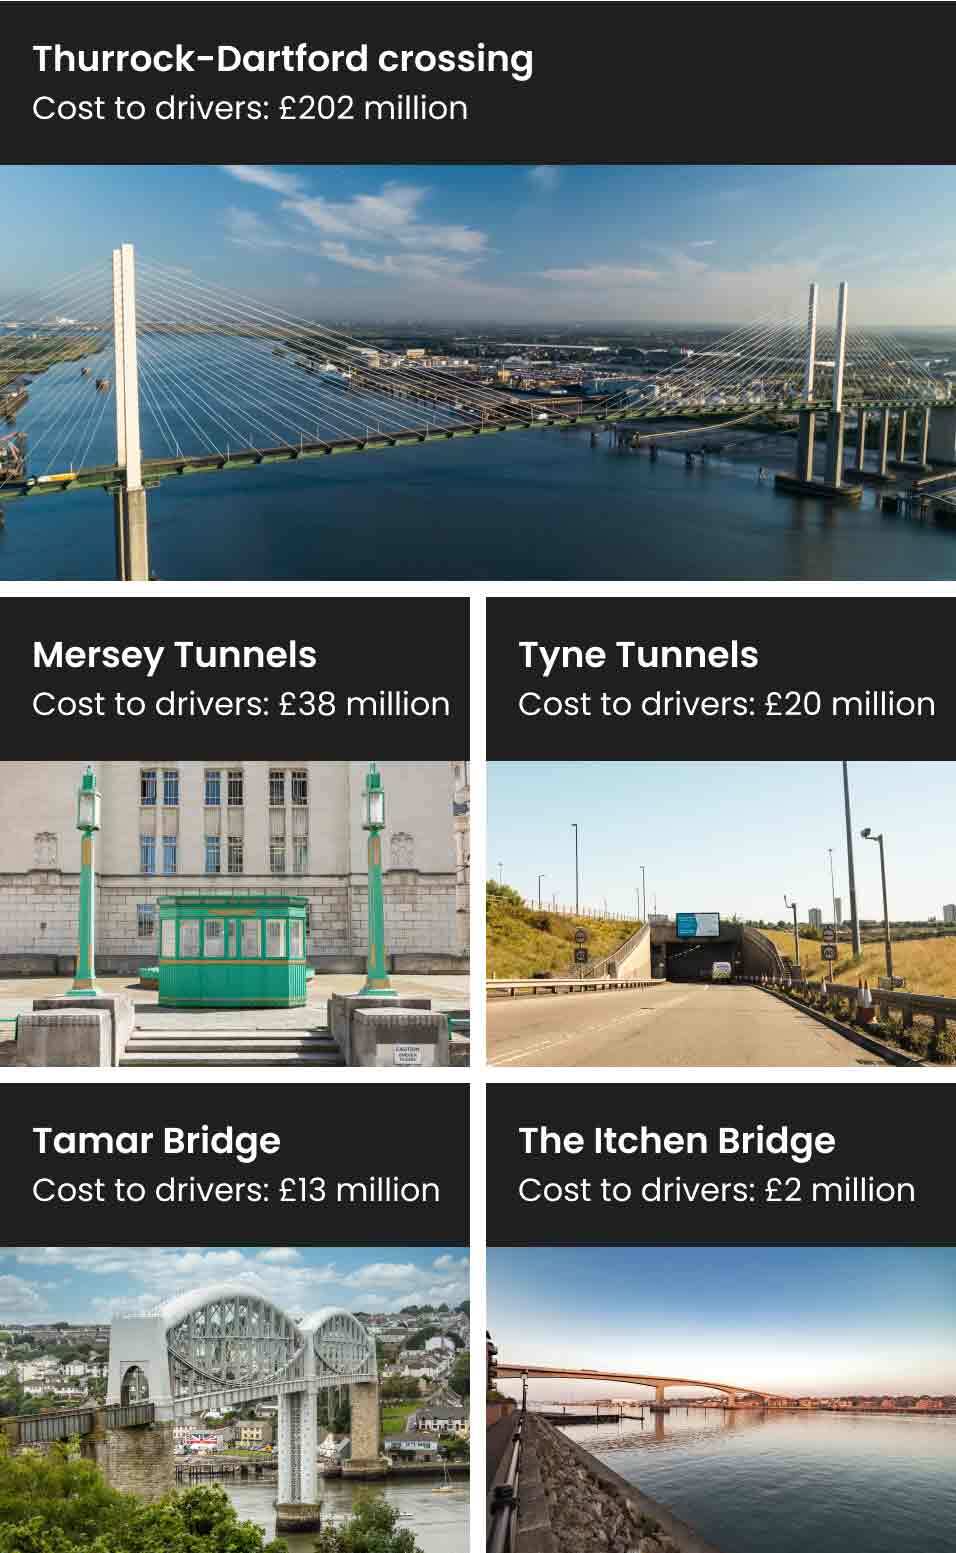 Image showing costs to drivers for crossing bridges